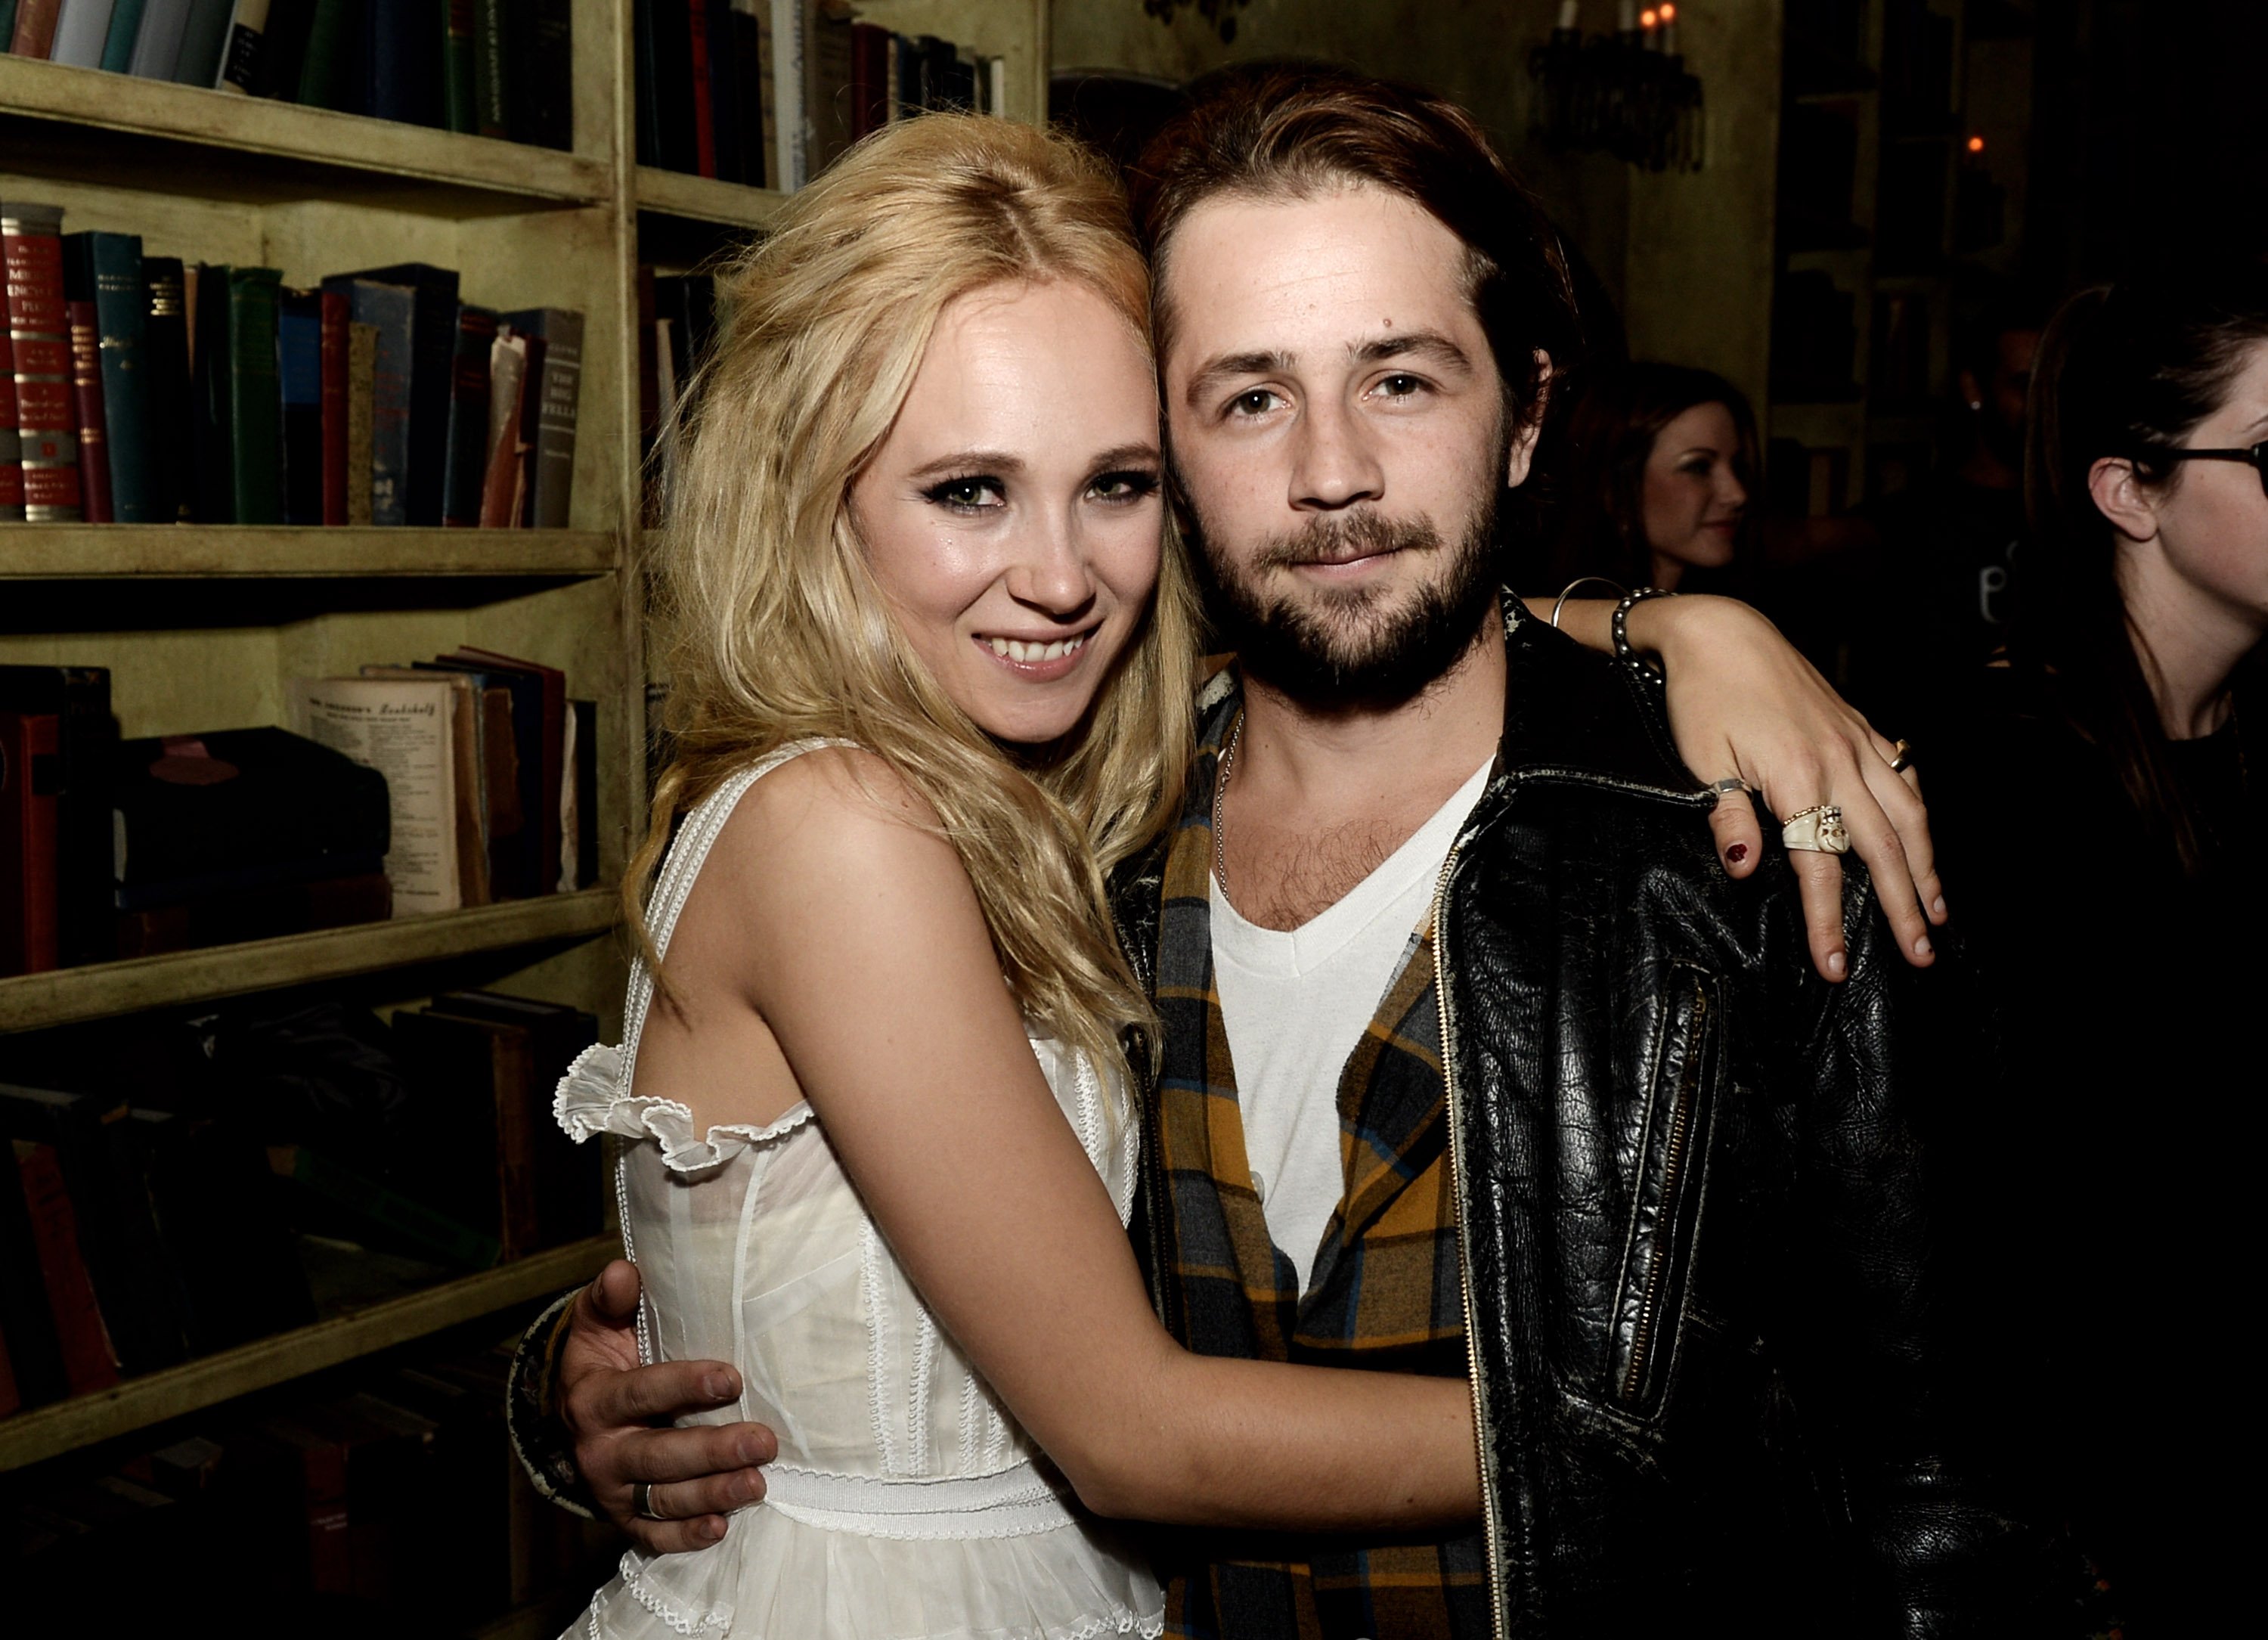 Actors Juno Temple (L) and Michael Angarano pose at the after-party for the premiere of "Afternoon Delight" at Hemmingway's on August 19, 2013 in Los Angeles, California. | Source: Getty Images